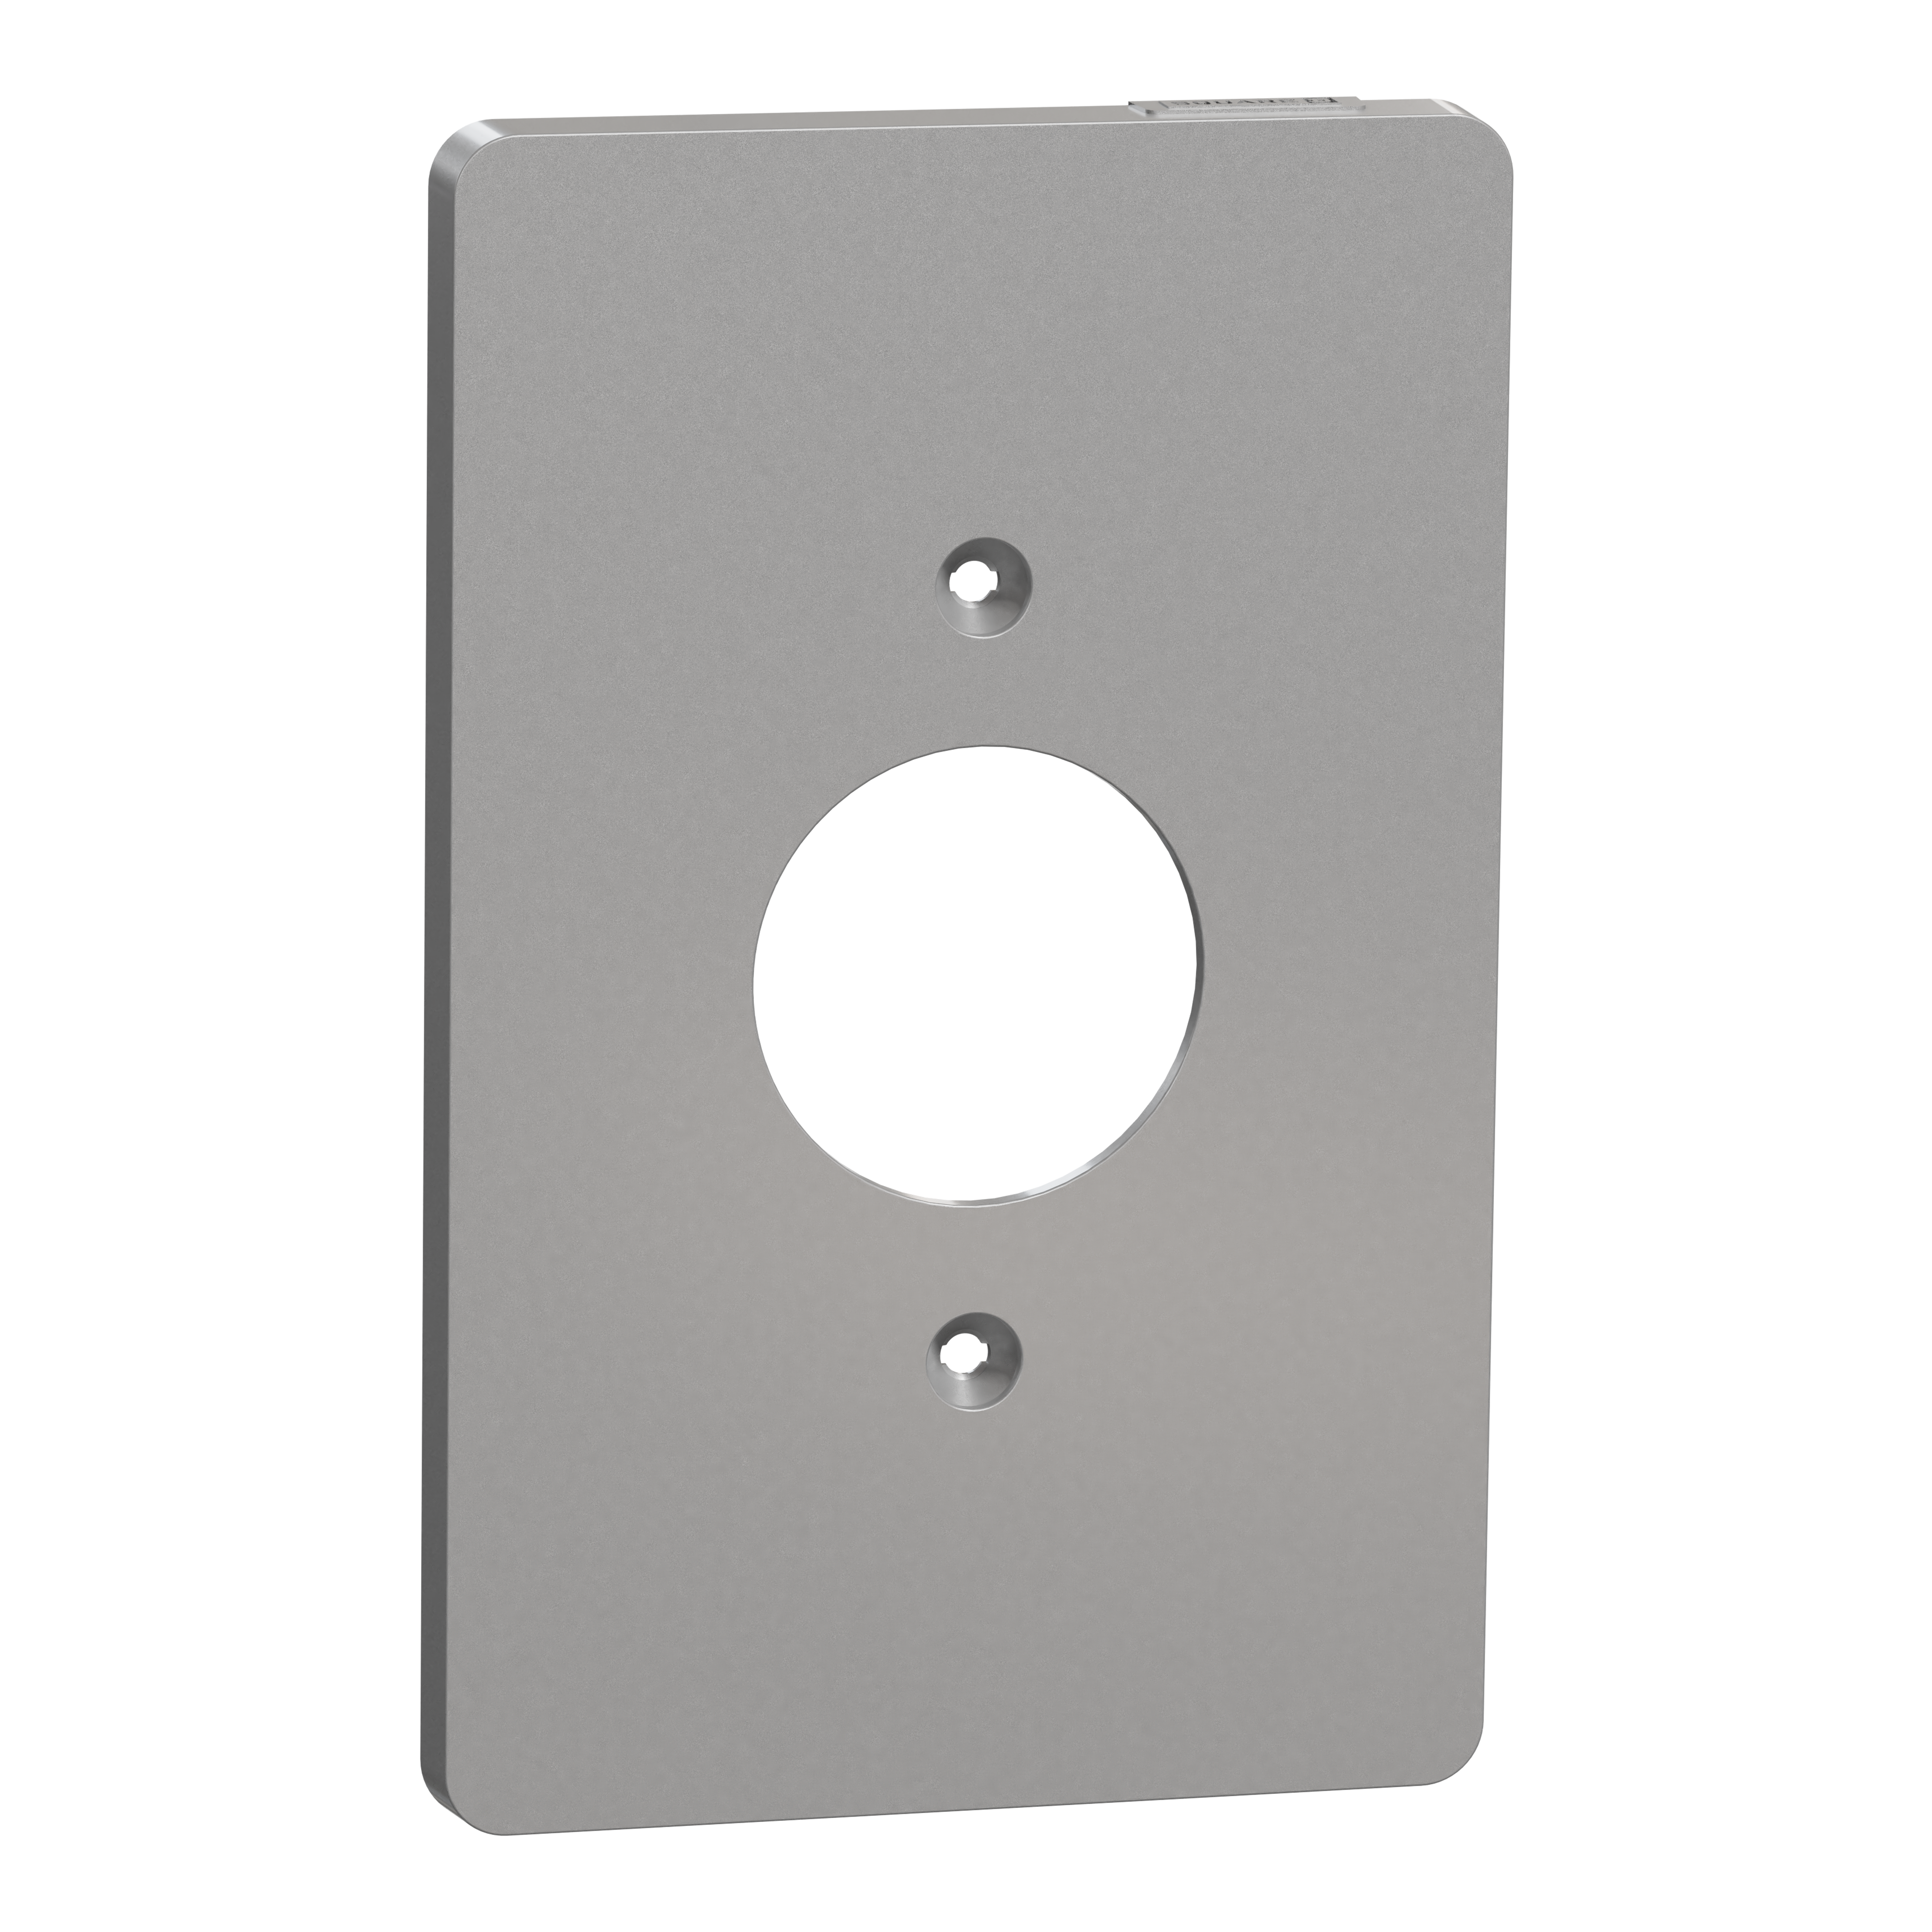 Cover frame, X Series, for socket-outlet, 1 gang, screw fixed, mid sized plus, gray, matte finish